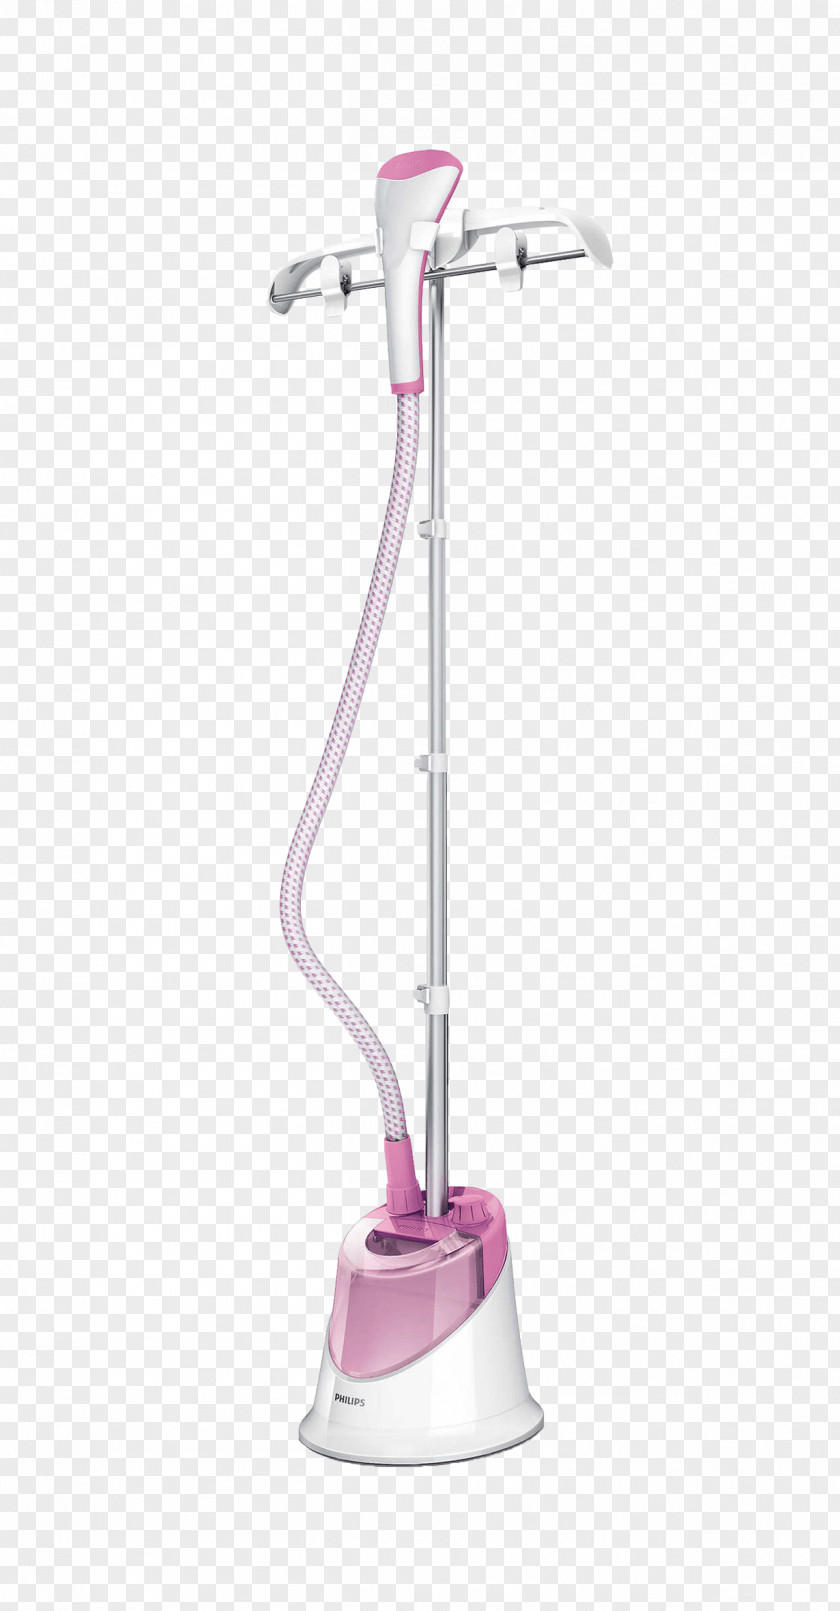 Garment Steamer Clothes Clothing Philips Iron Shopping PNG